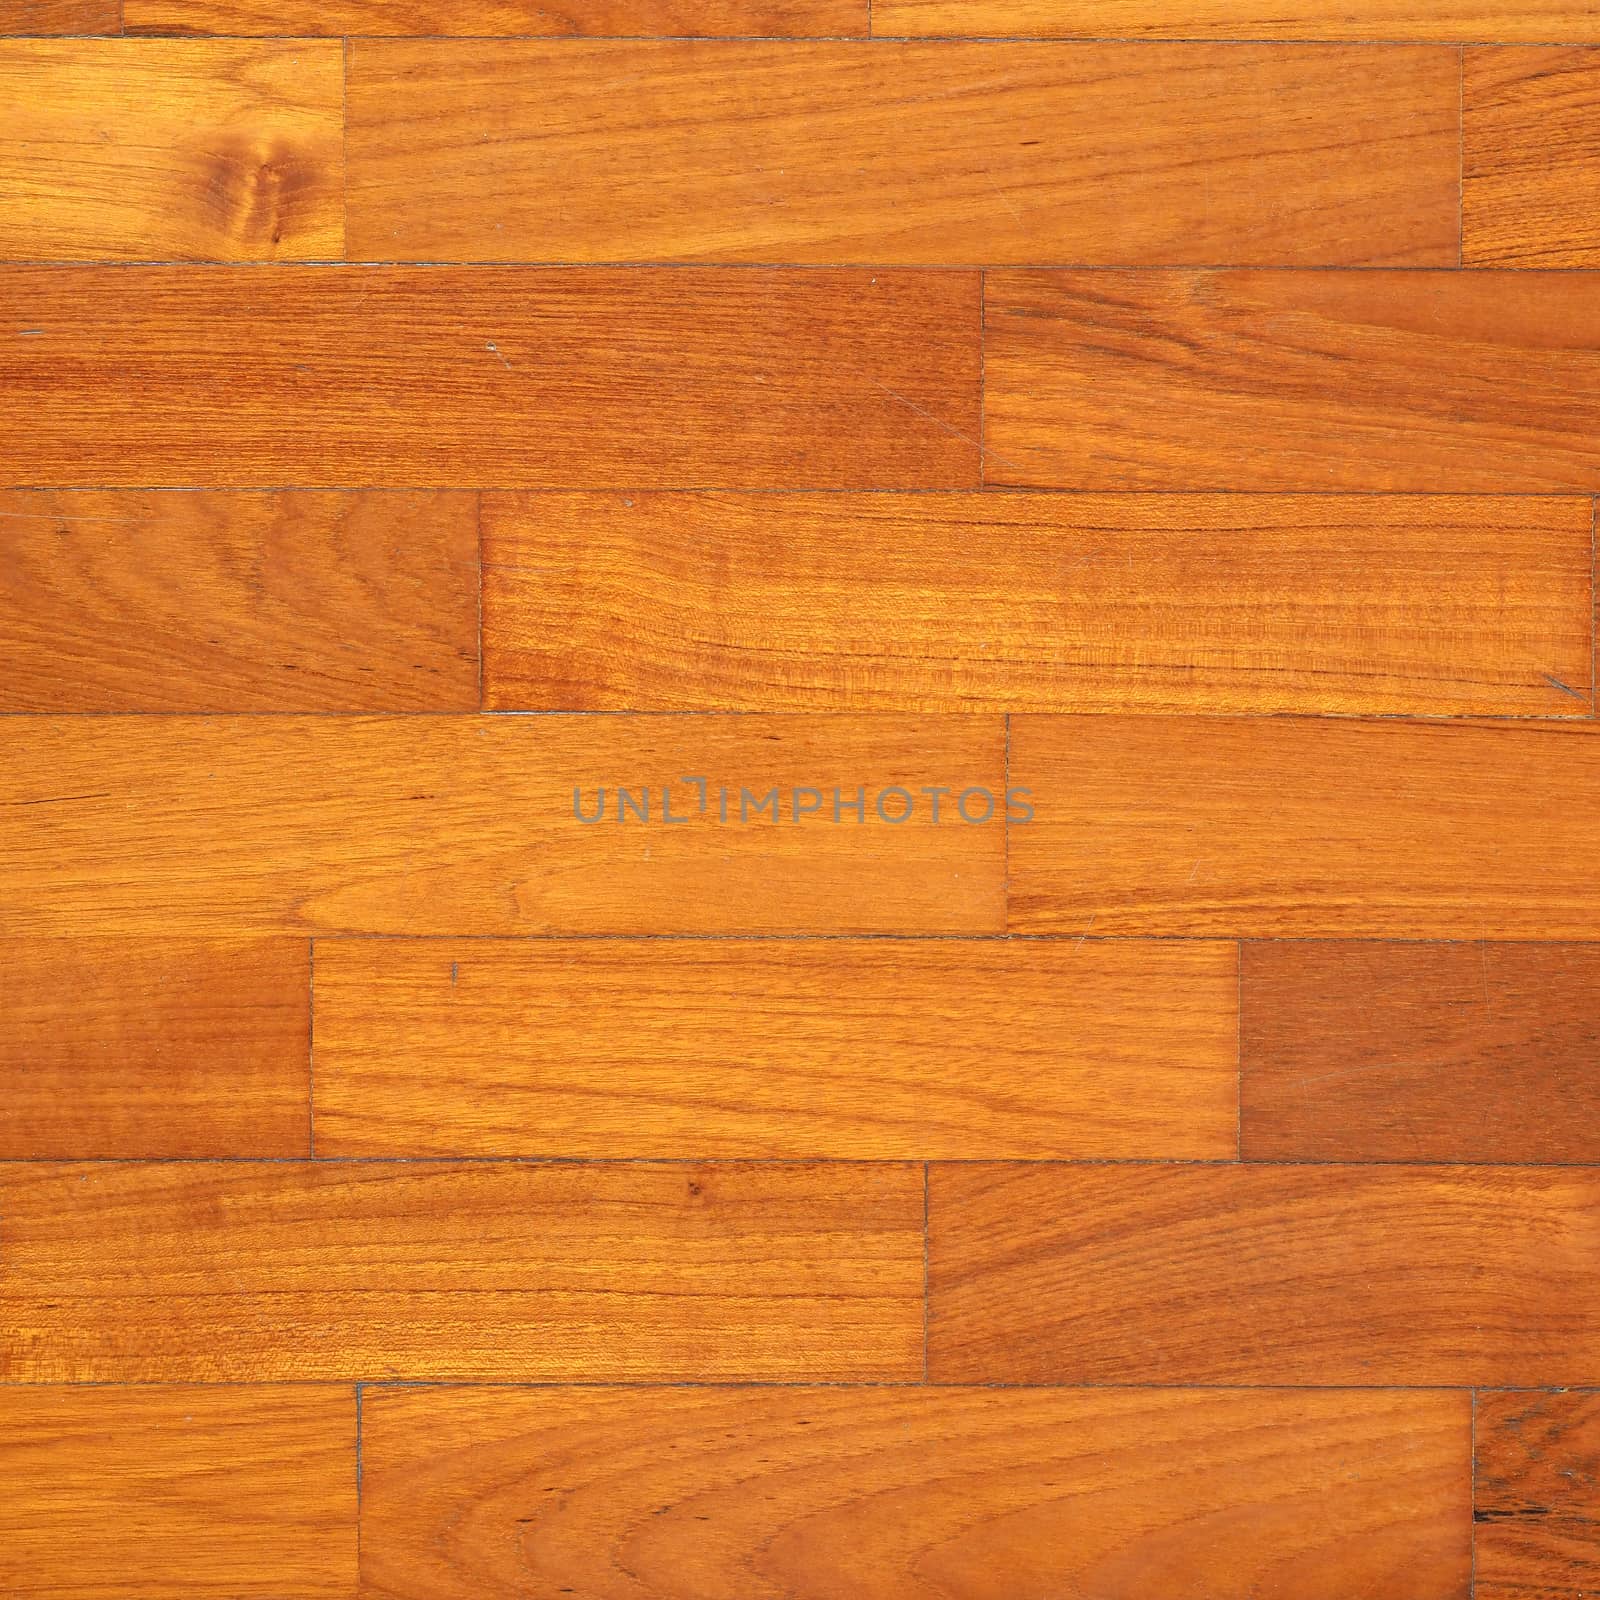 brown wood floor background by claudiodivizia